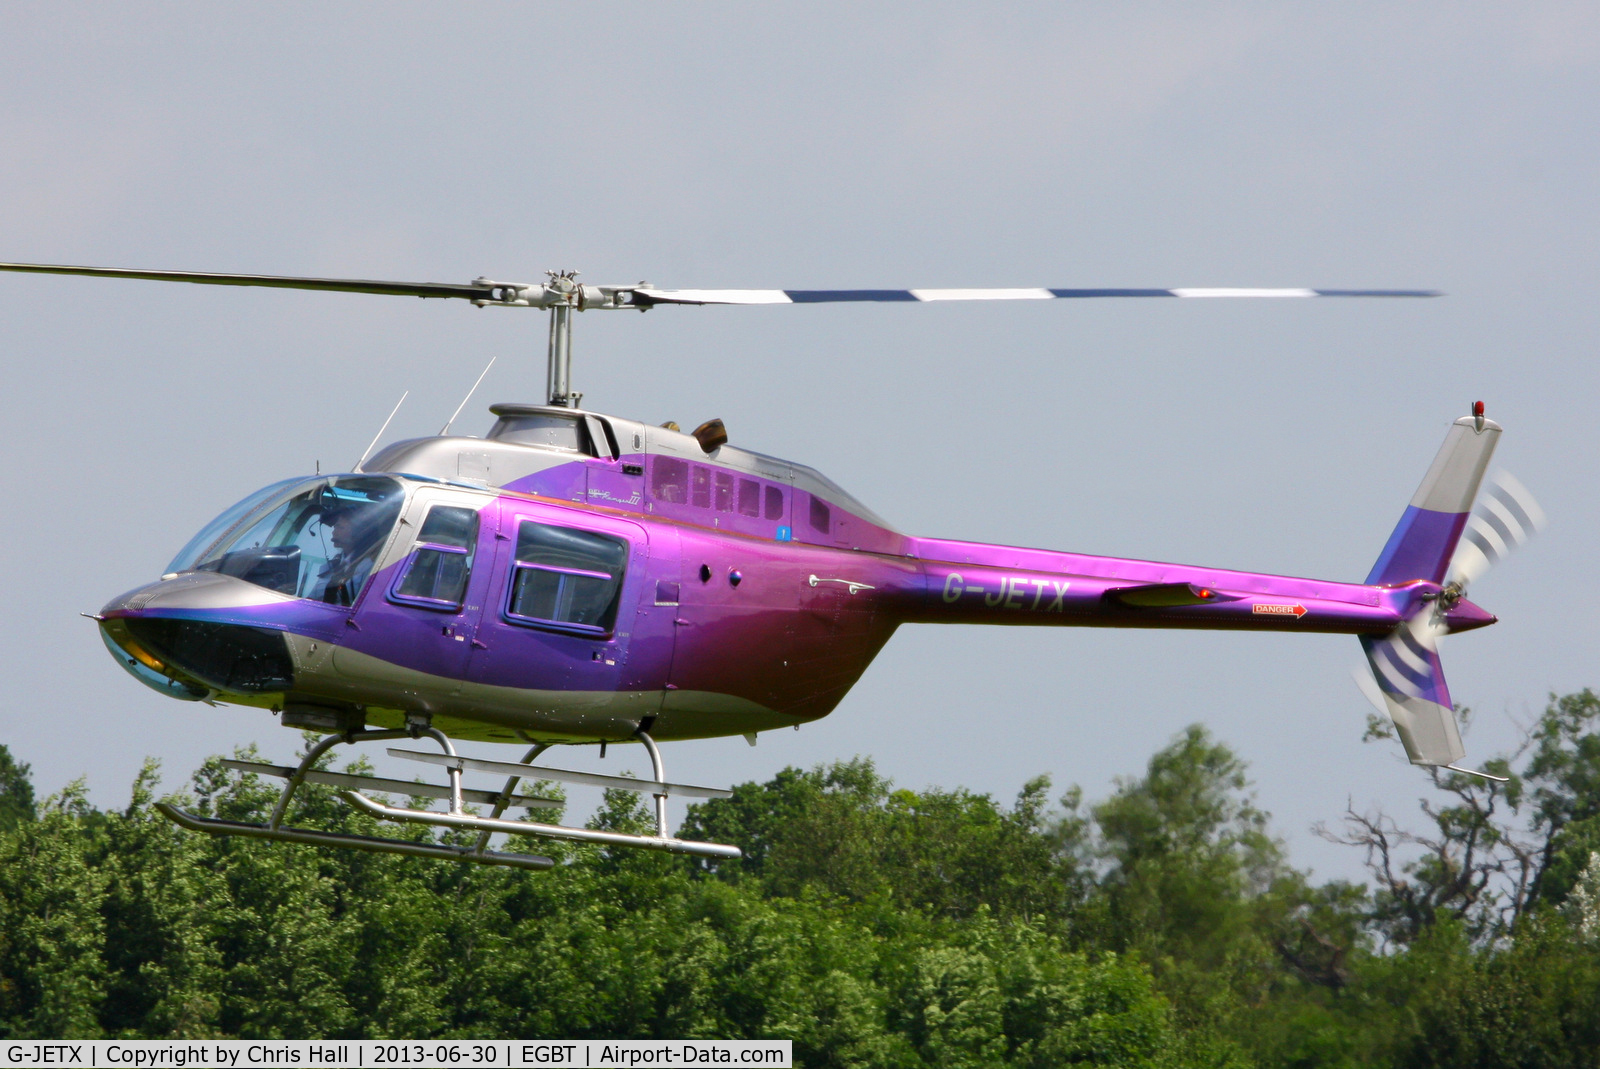 G-JETX, 1981 Bell 206B JetRanger III C/N 3208, being used for ferrying race fans to the British F1 Grand Prix at Silverstone